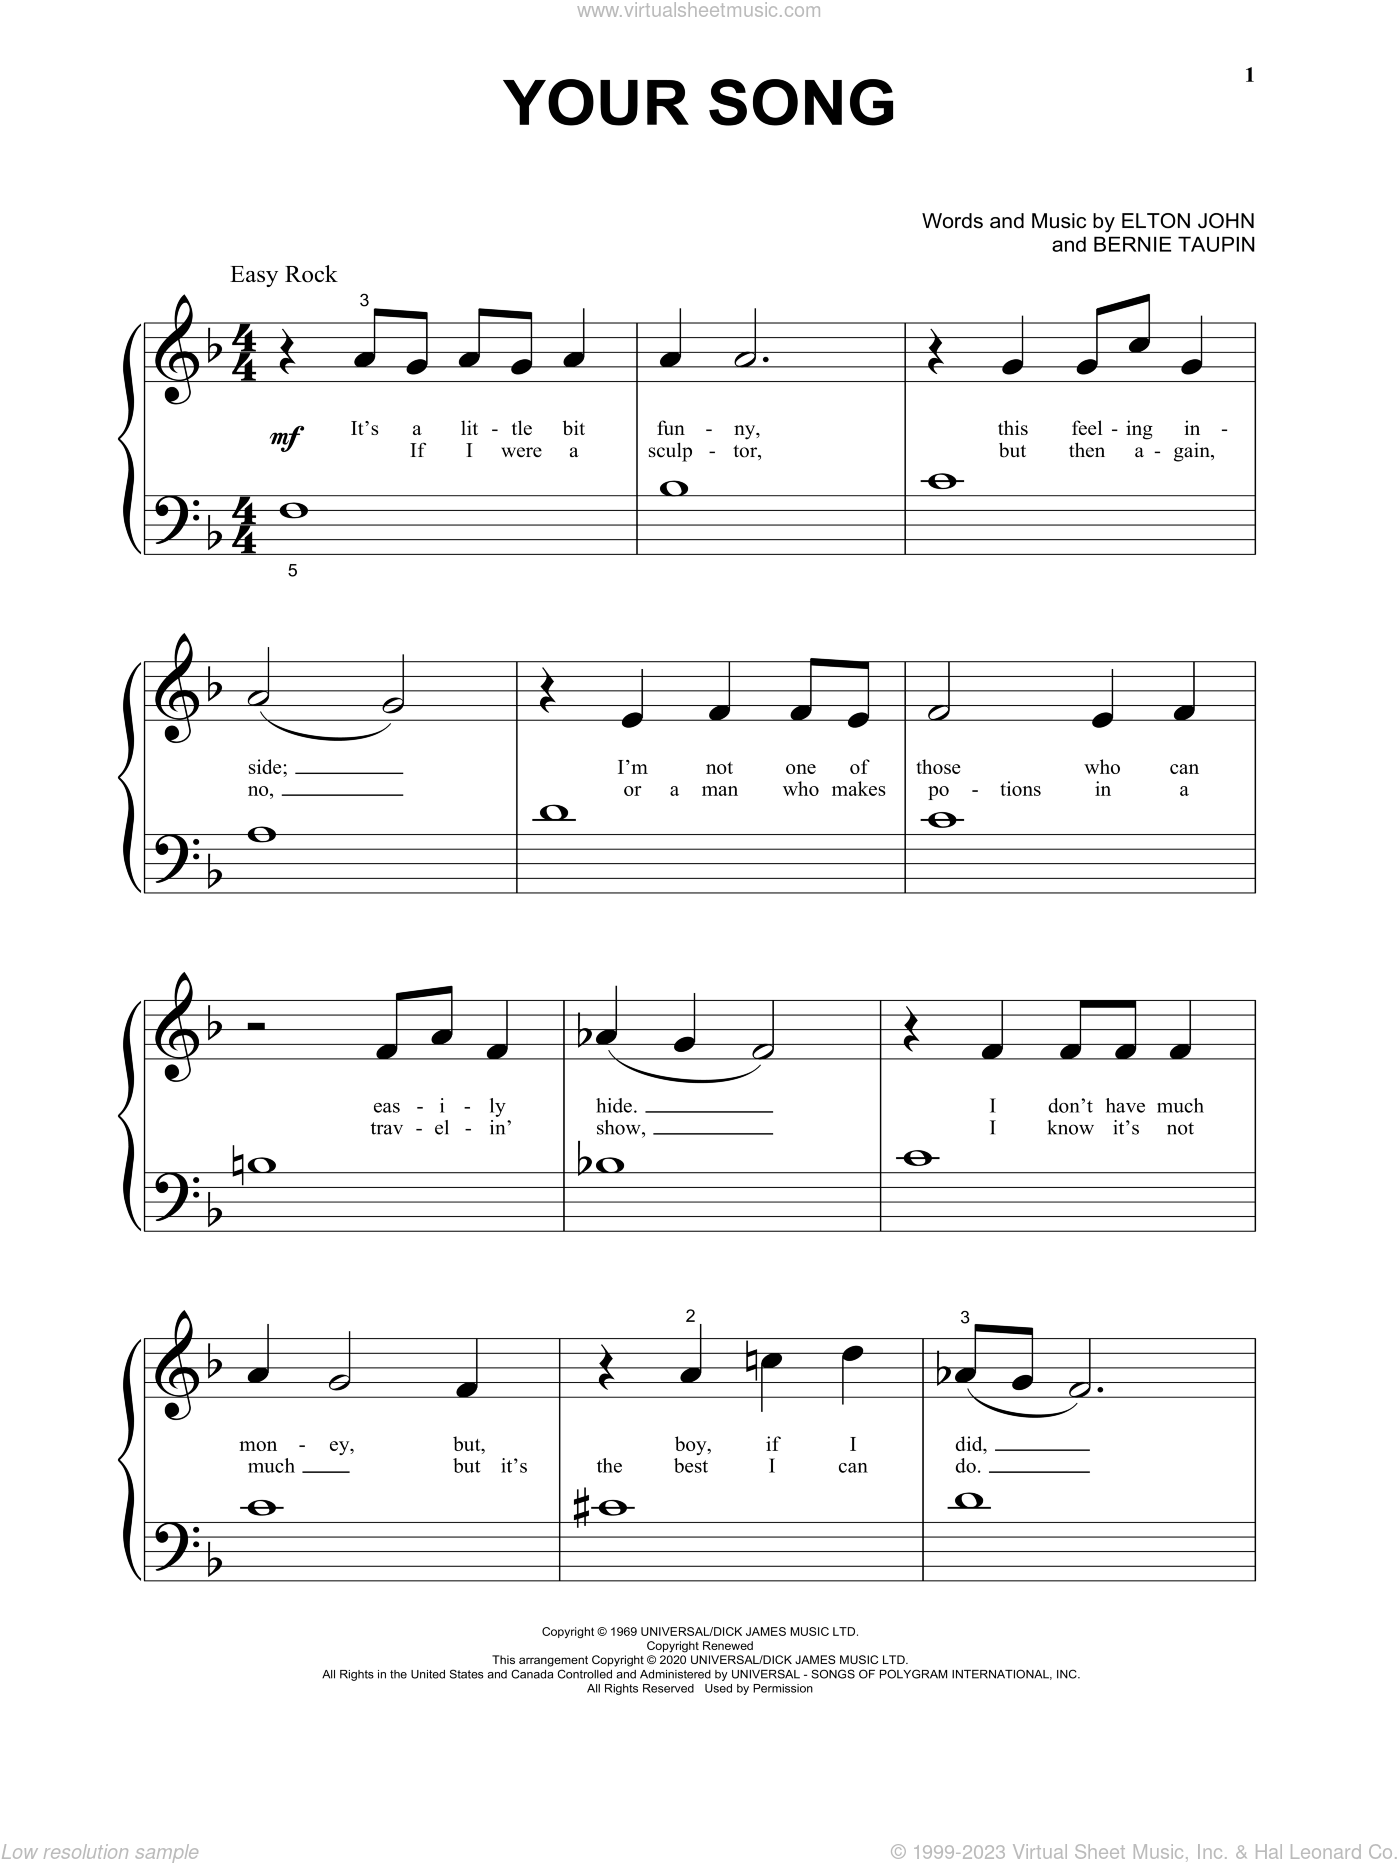 Free Learn To Fly by Elton John and Surfaces sheet music